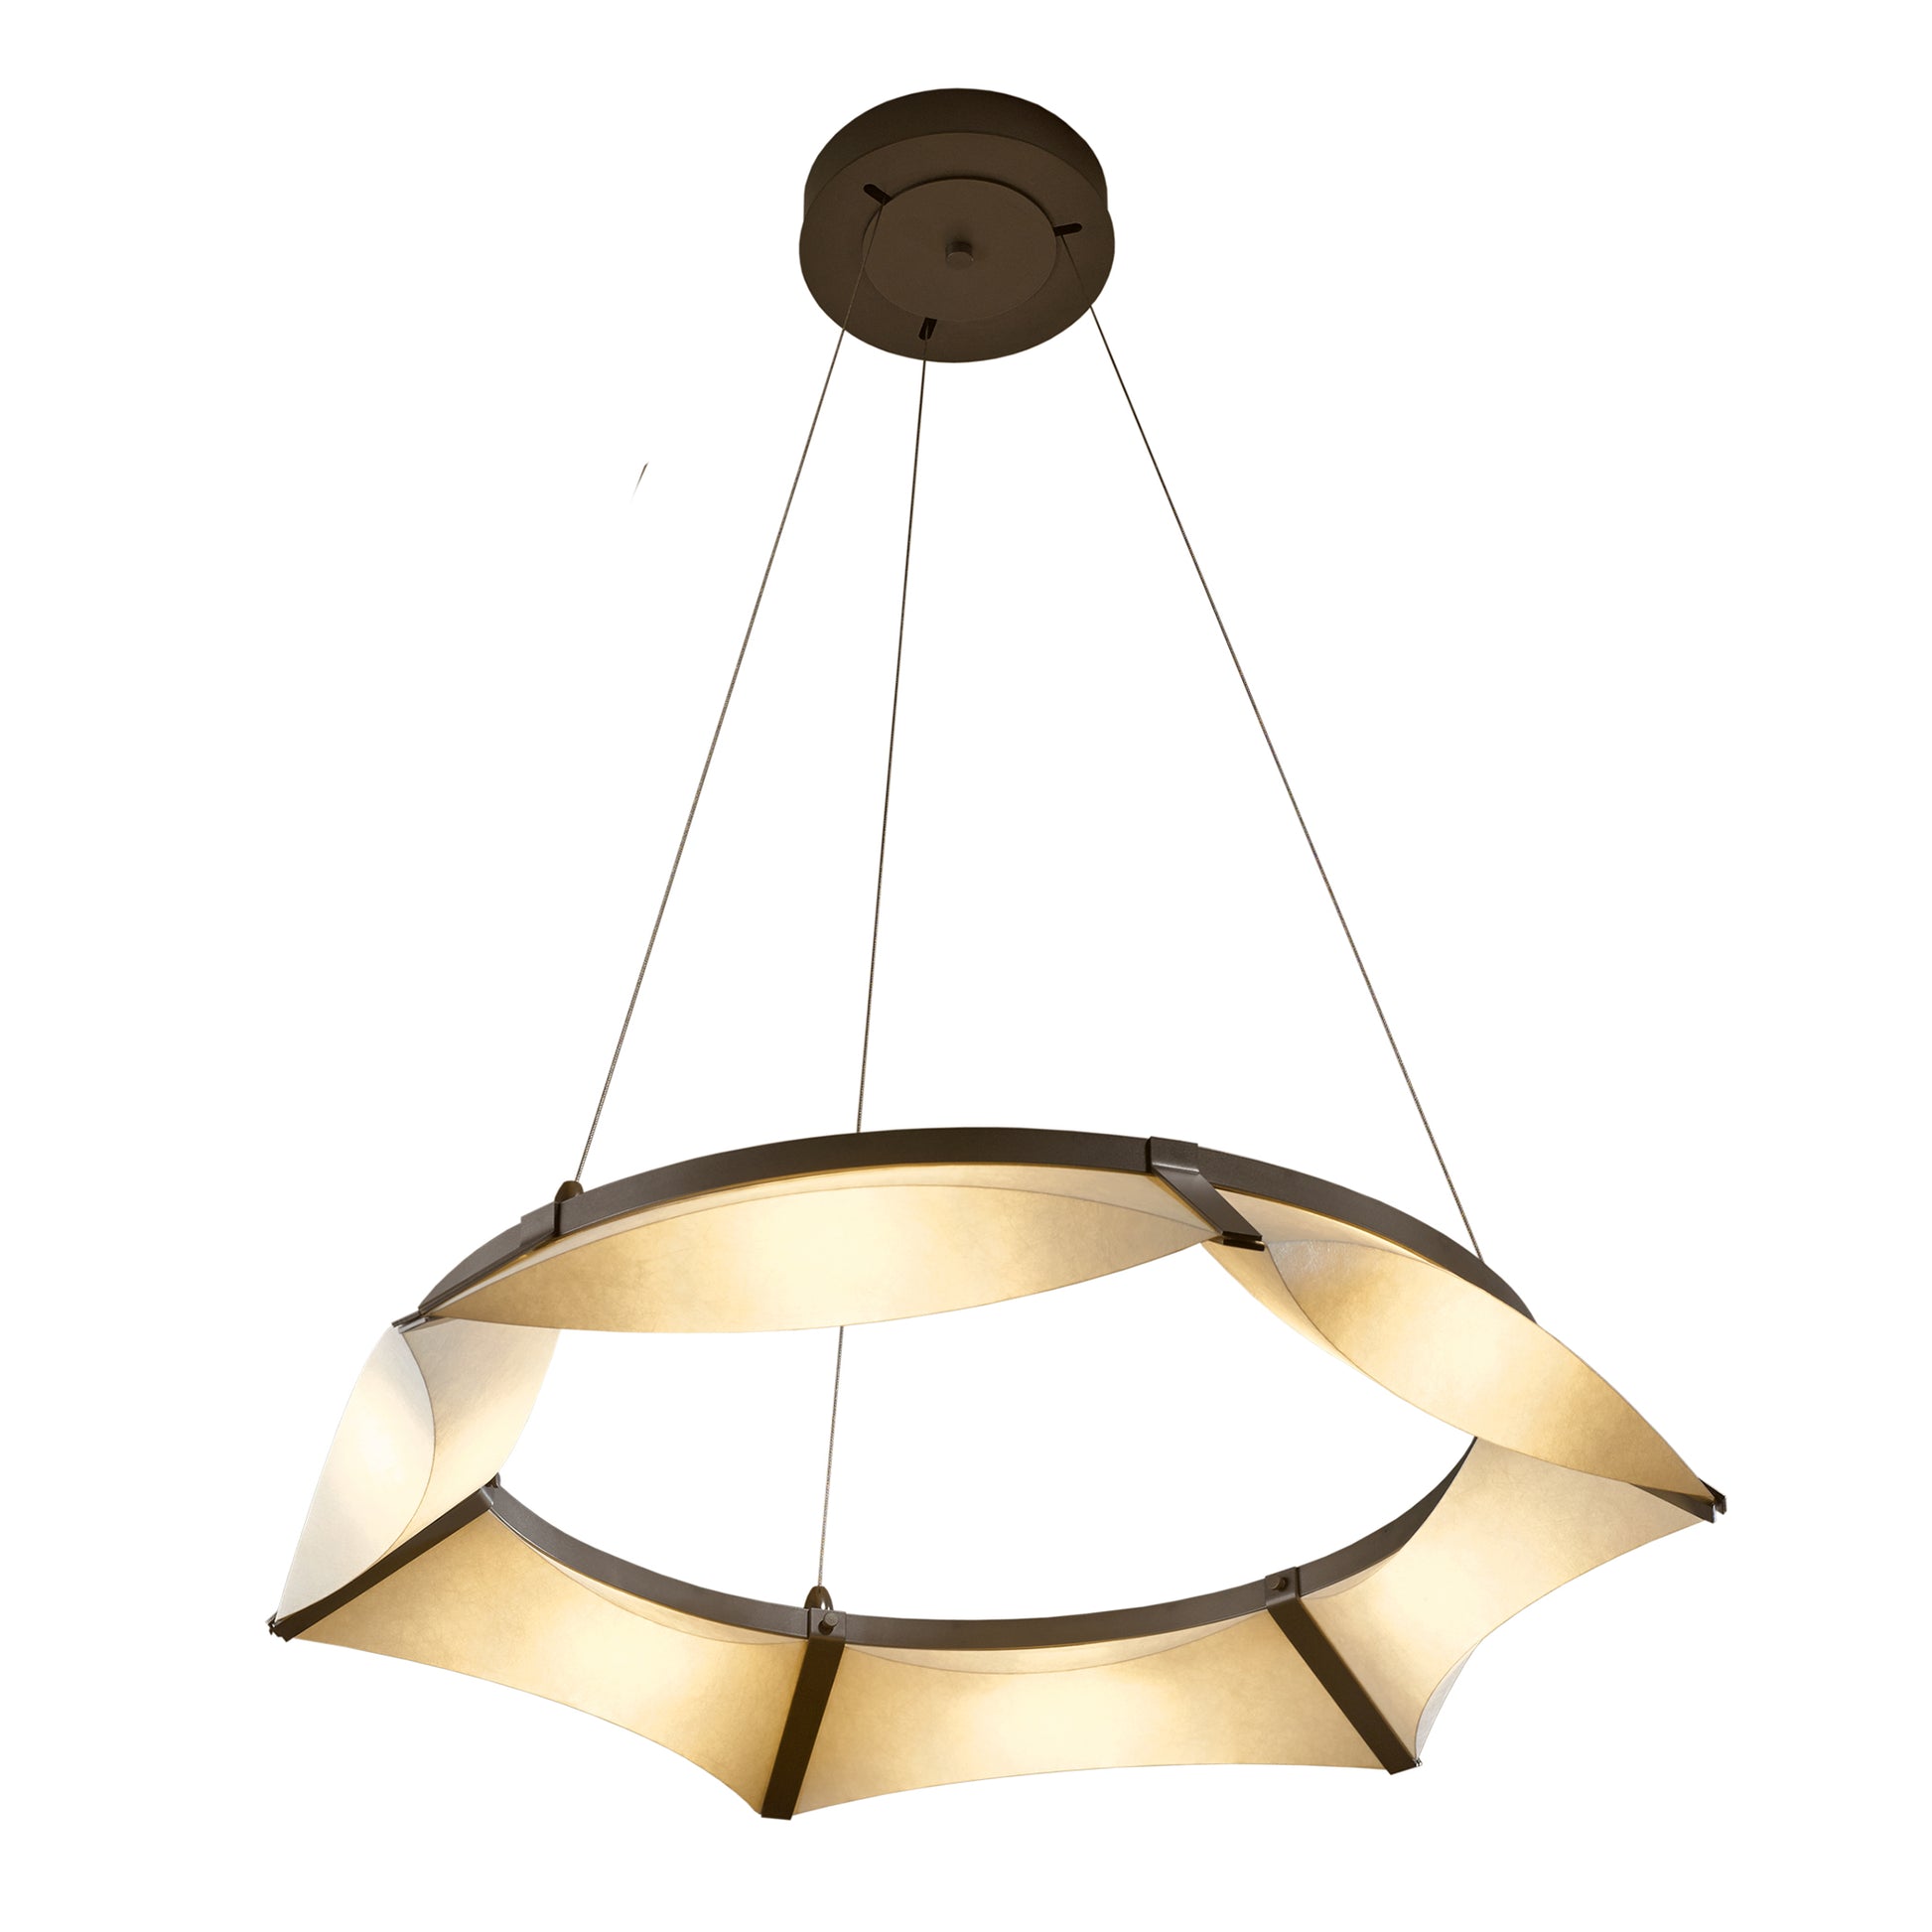 The Hubbardton Forge Bento Pendant is a circular-shaped light fixture that hangs elegantly from the ceiling, adding a touch of sophistication to any space.